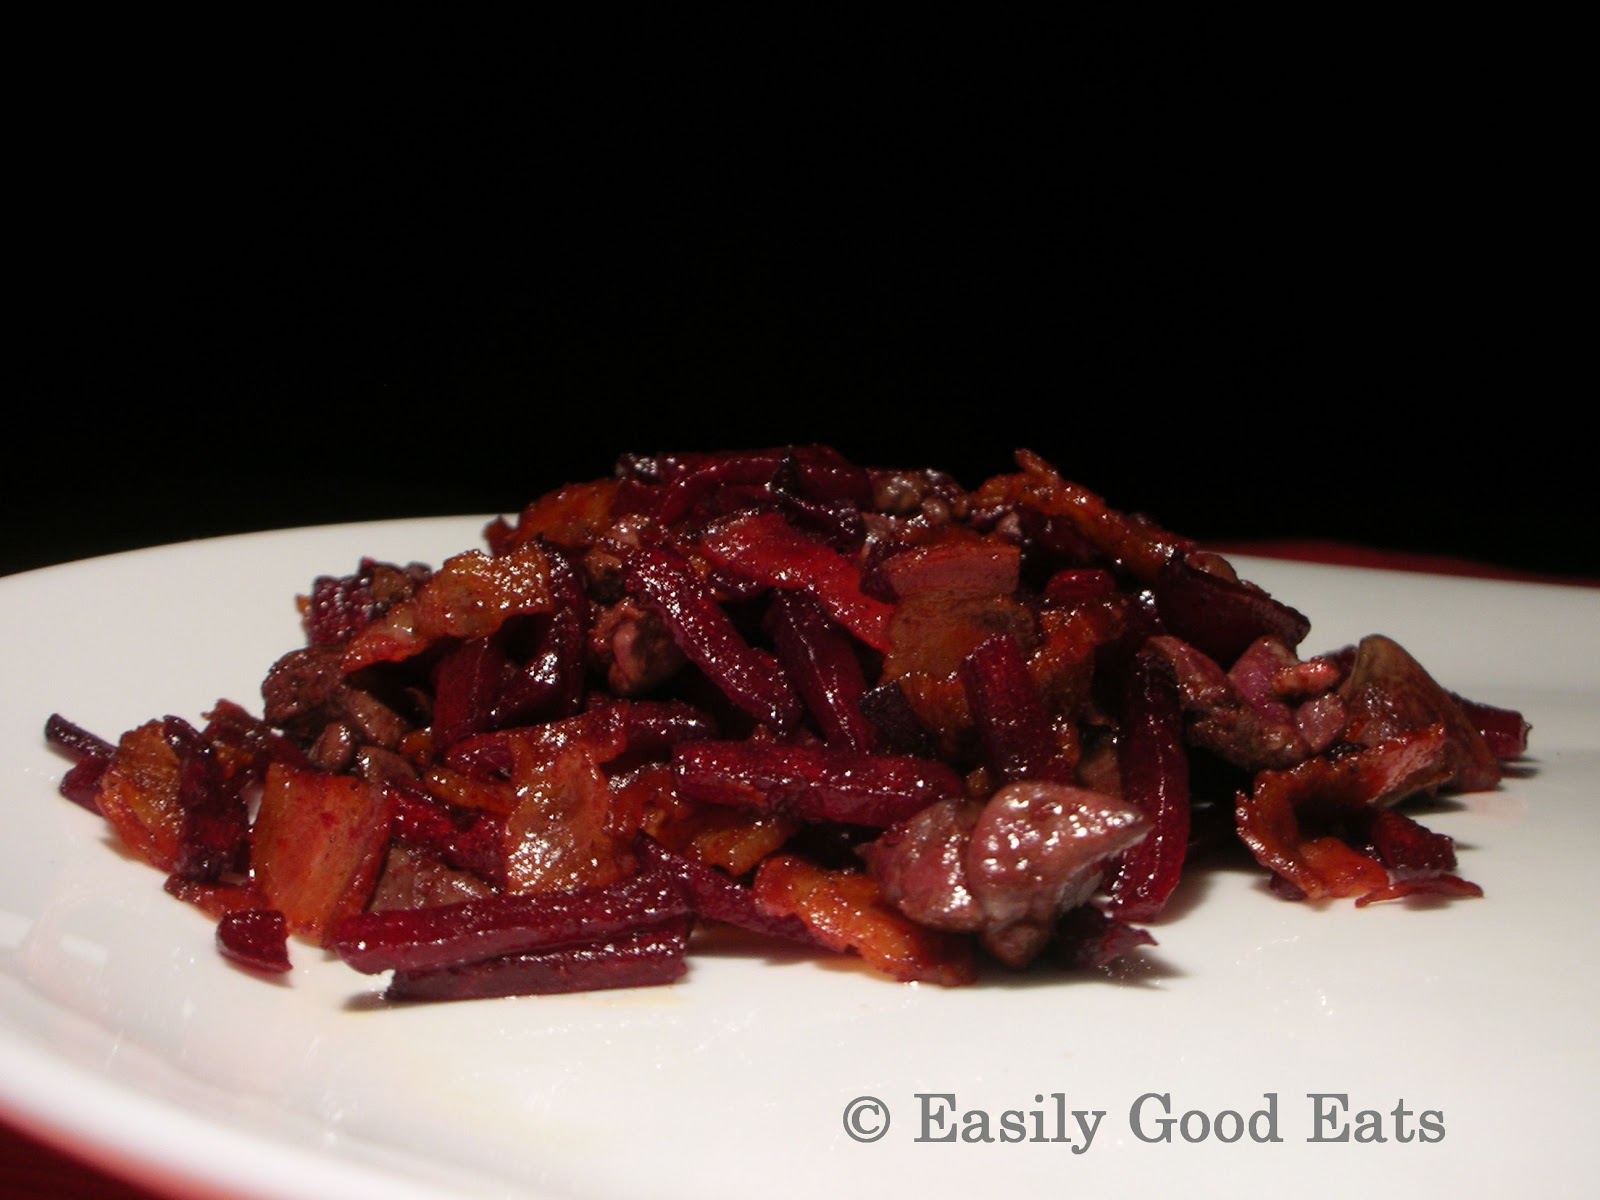 Easily Good Eats Fried Beetroot, Liver and Bacon Recipe